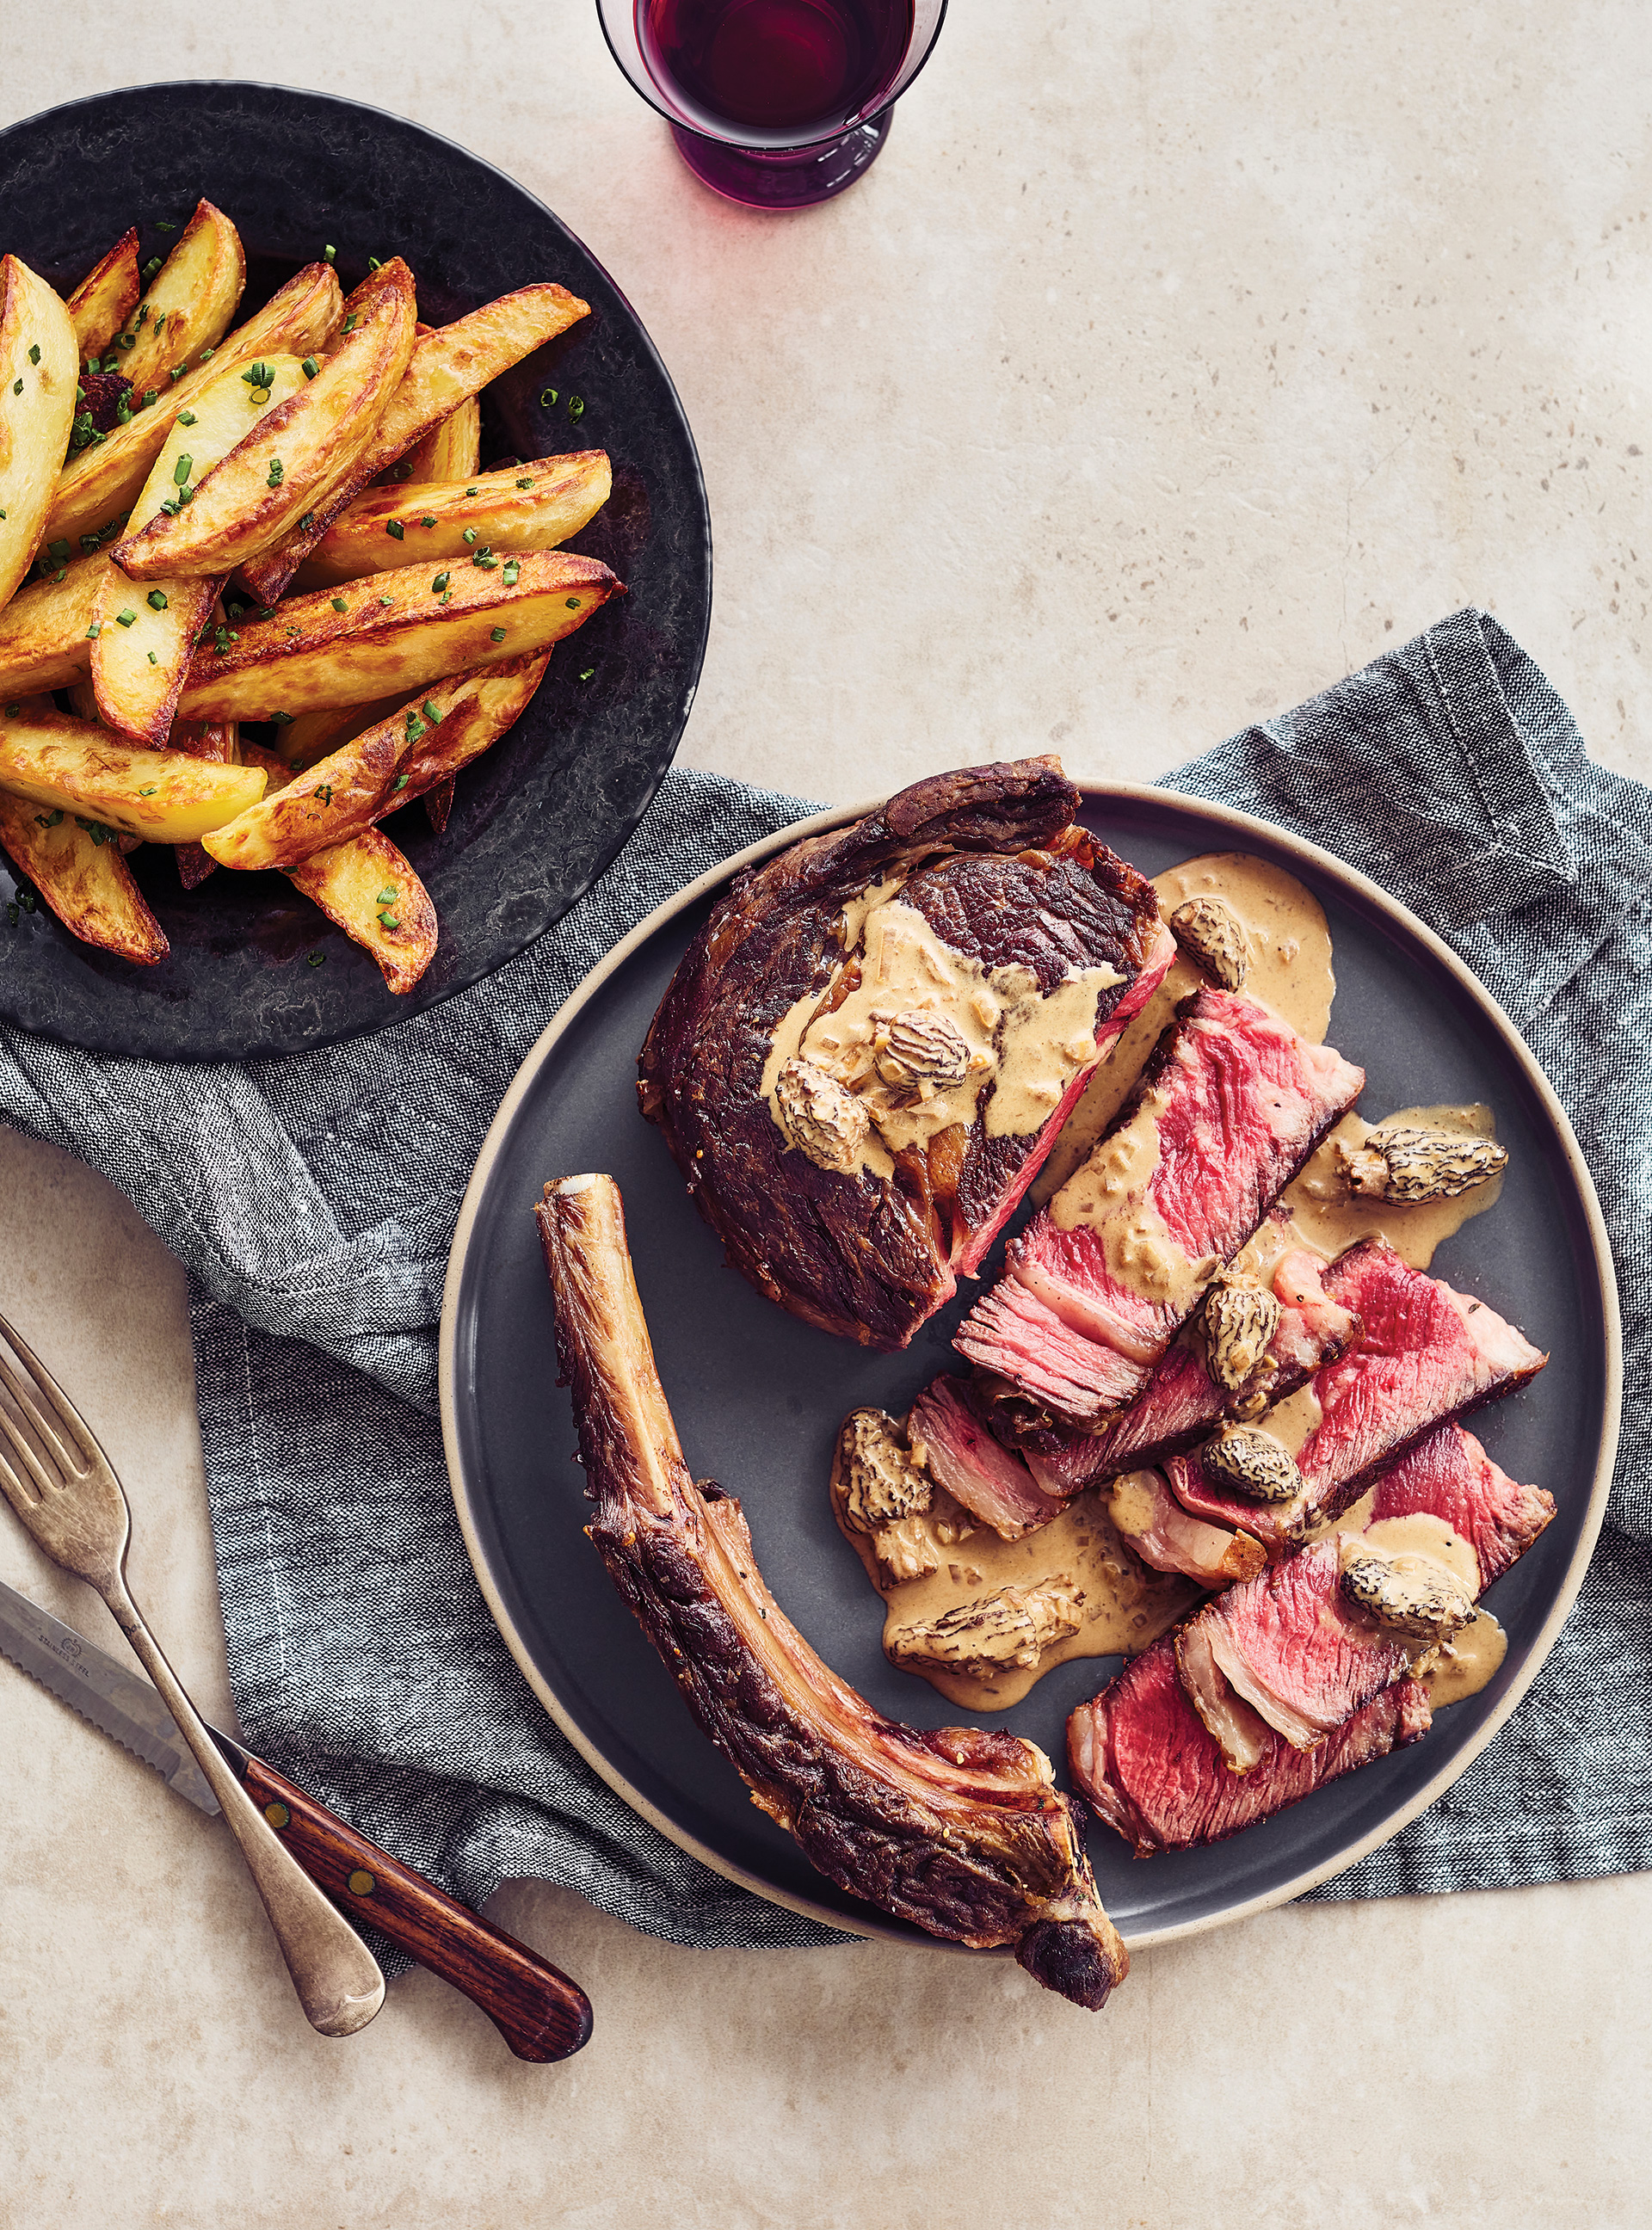 Aged Rib Steak and Oven Fries with Black Garlic-Morel Sauce